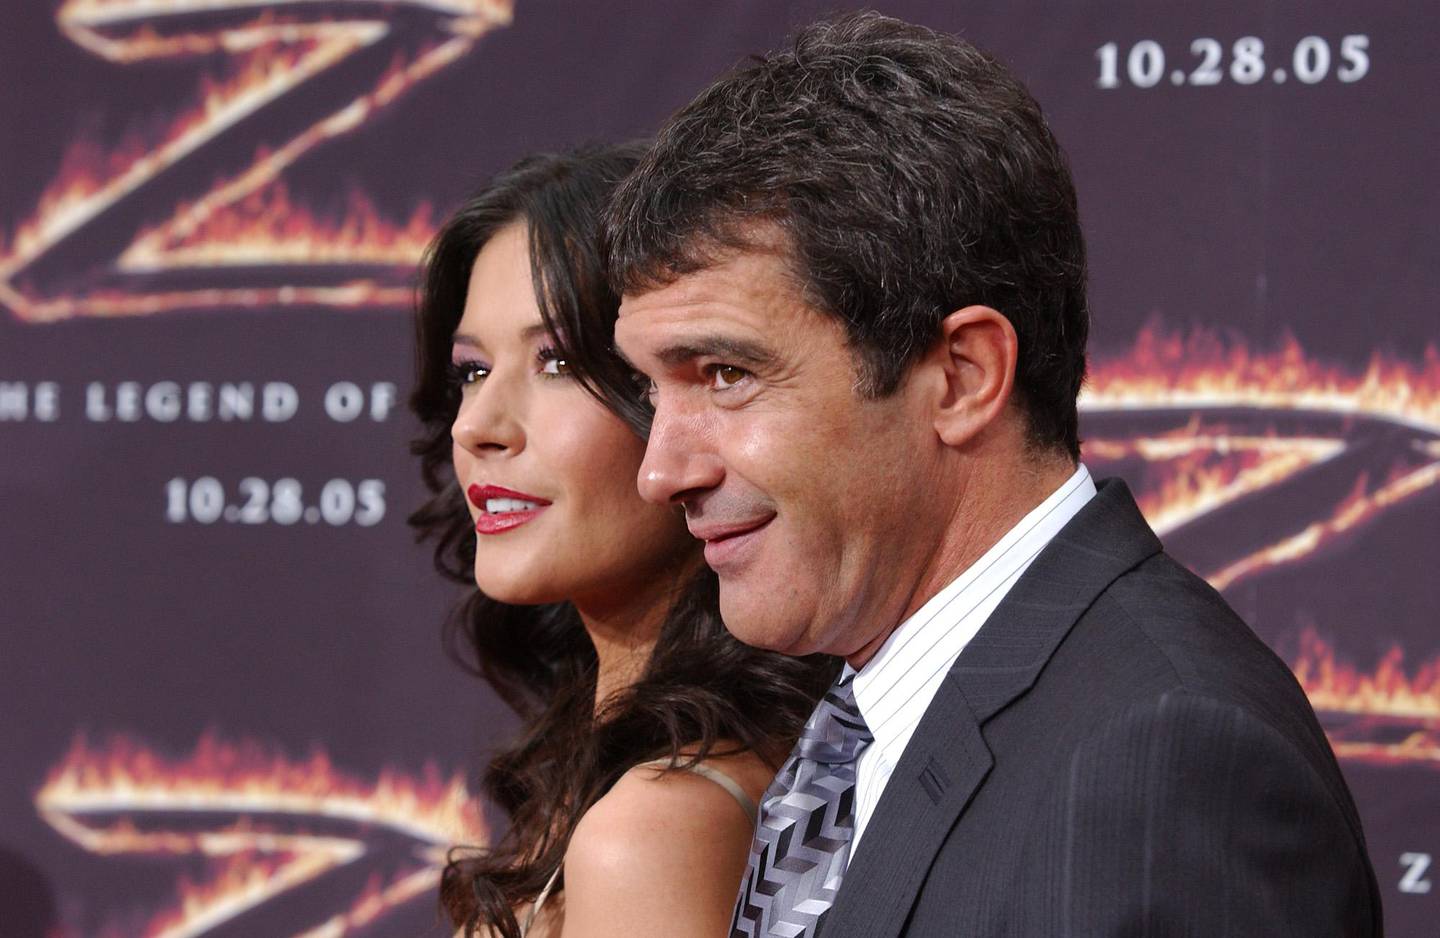 Catherine Zeta-Jones, left, and Antonio Banderas, right, pose for photographers on the red carpet before the premiere of "The Legend of Zorro," on Sunday, Oct. 16, 2005, in downtown Los Angeles. (AP Photo/Rene Macura)                               